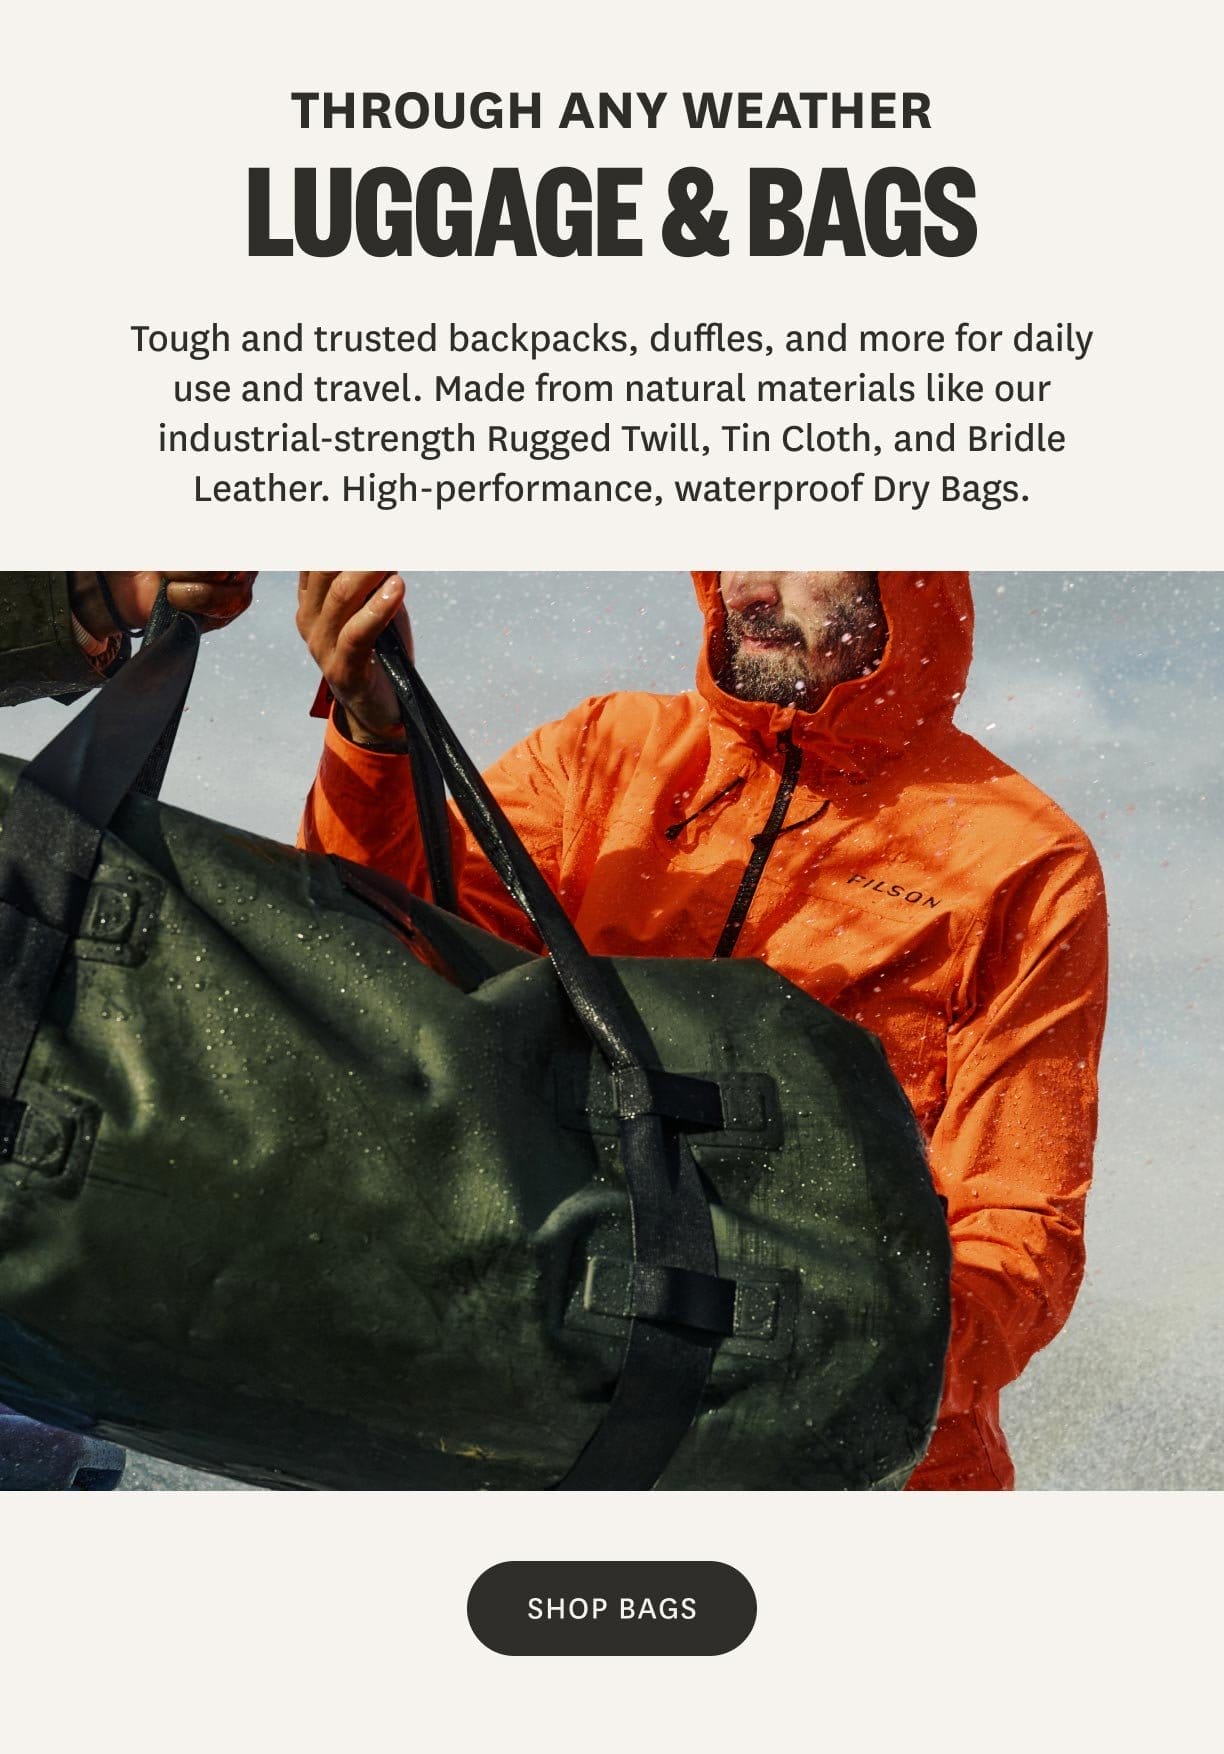 THROUGH ANY WEATHER - LUGGAGE & BAGS